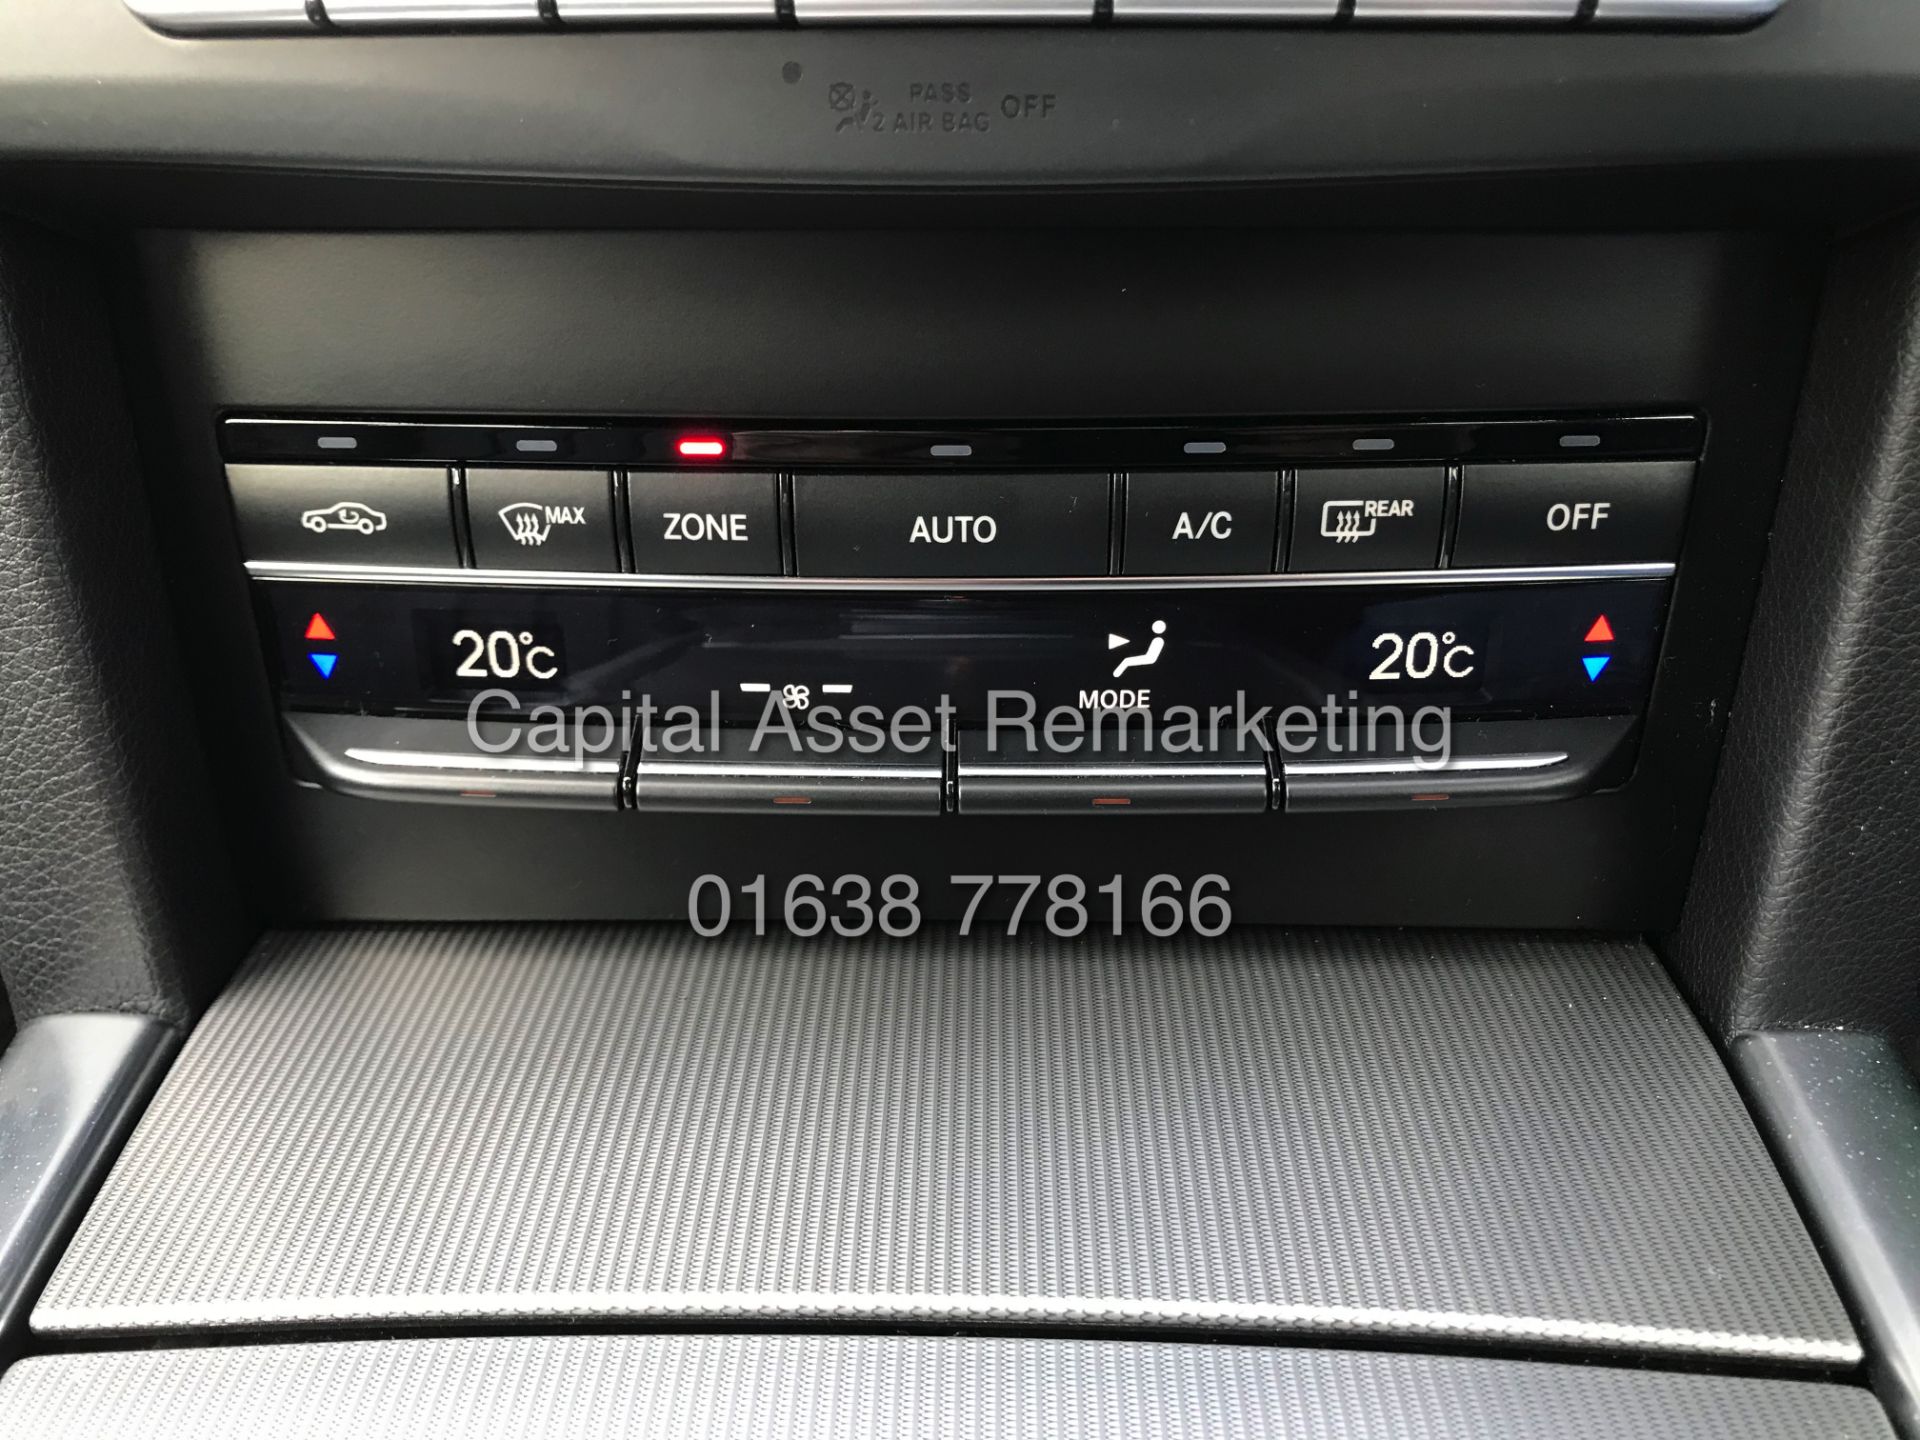 MERCEDES E220d "SPECIAL EQUIPMENT" 7G AUTO (64 REG) SAT NAV - FULL LEATHER - 1 OWNER - CLIMATE - Image 21 of 24